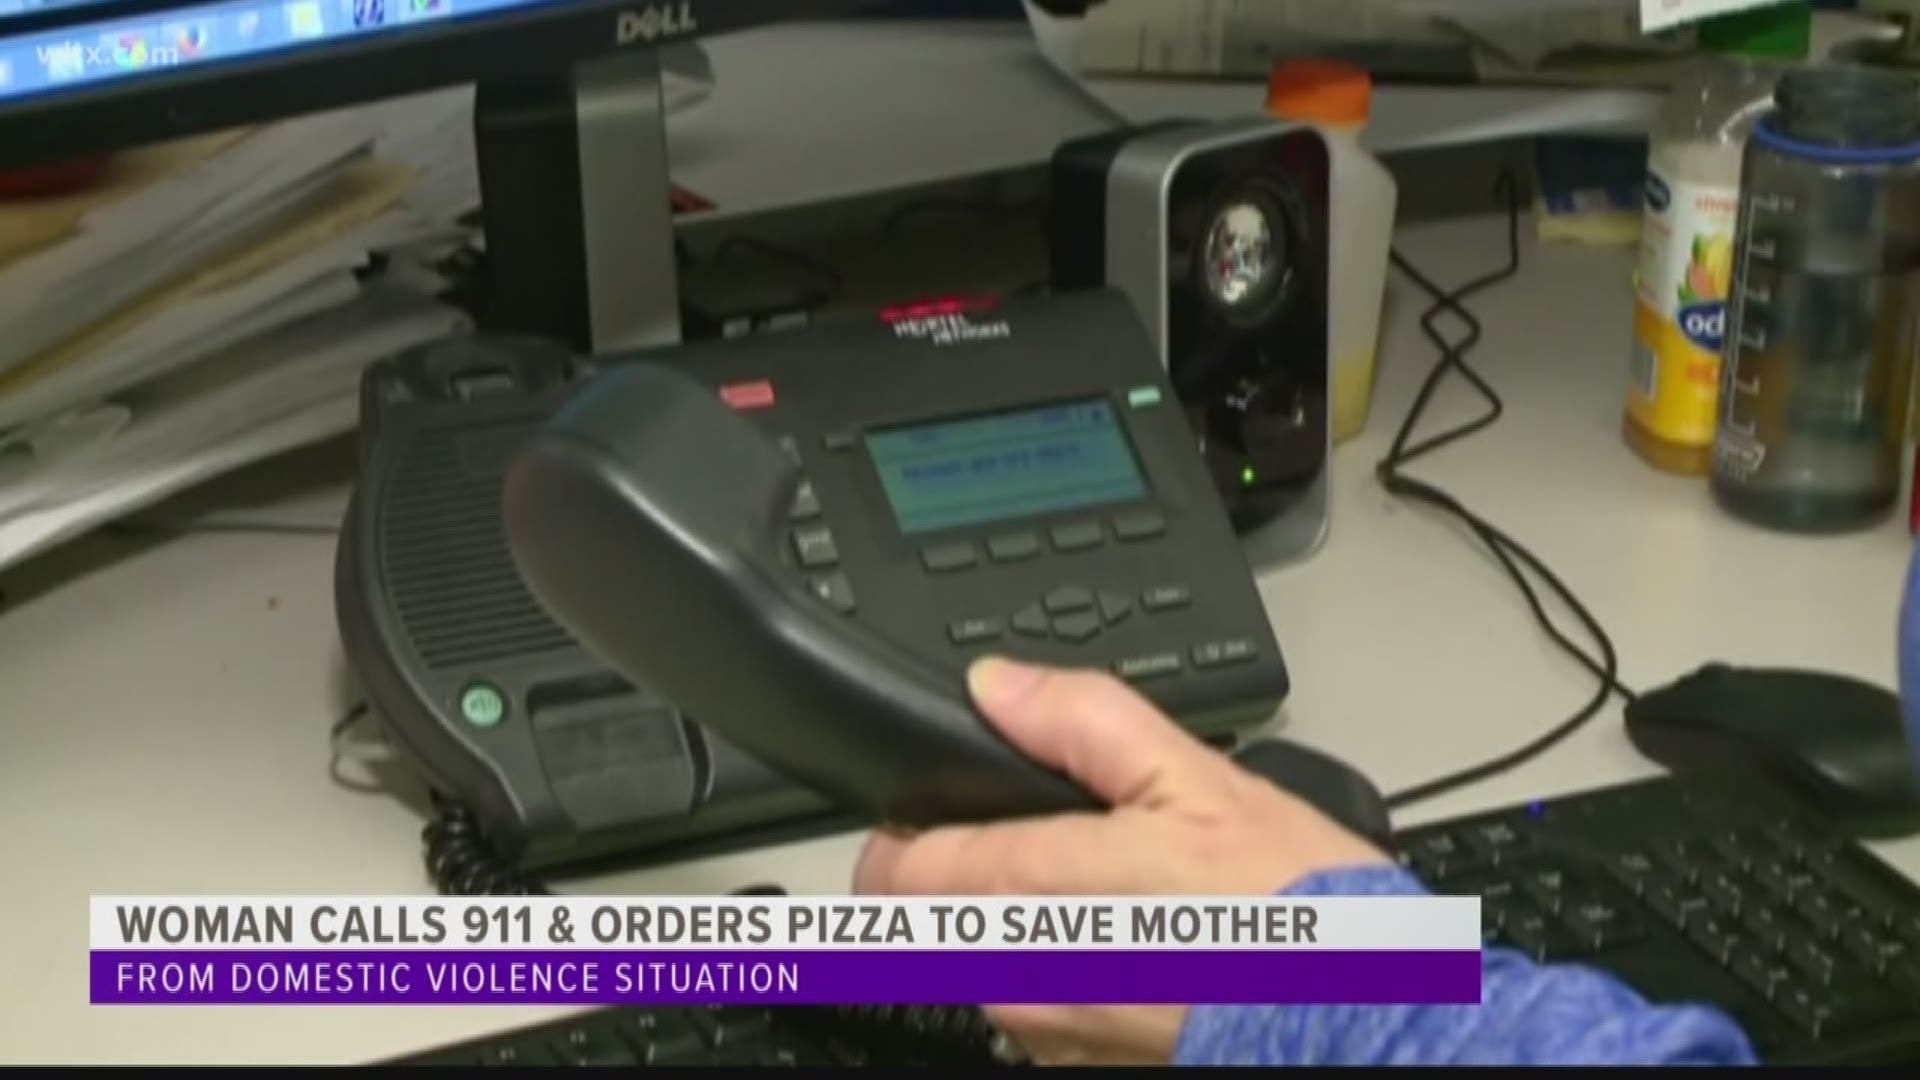 Near Toledo, Ohio a daughter called 9-1-1 and ordered a pizza. The dispatcher initially said it was the wrong number.